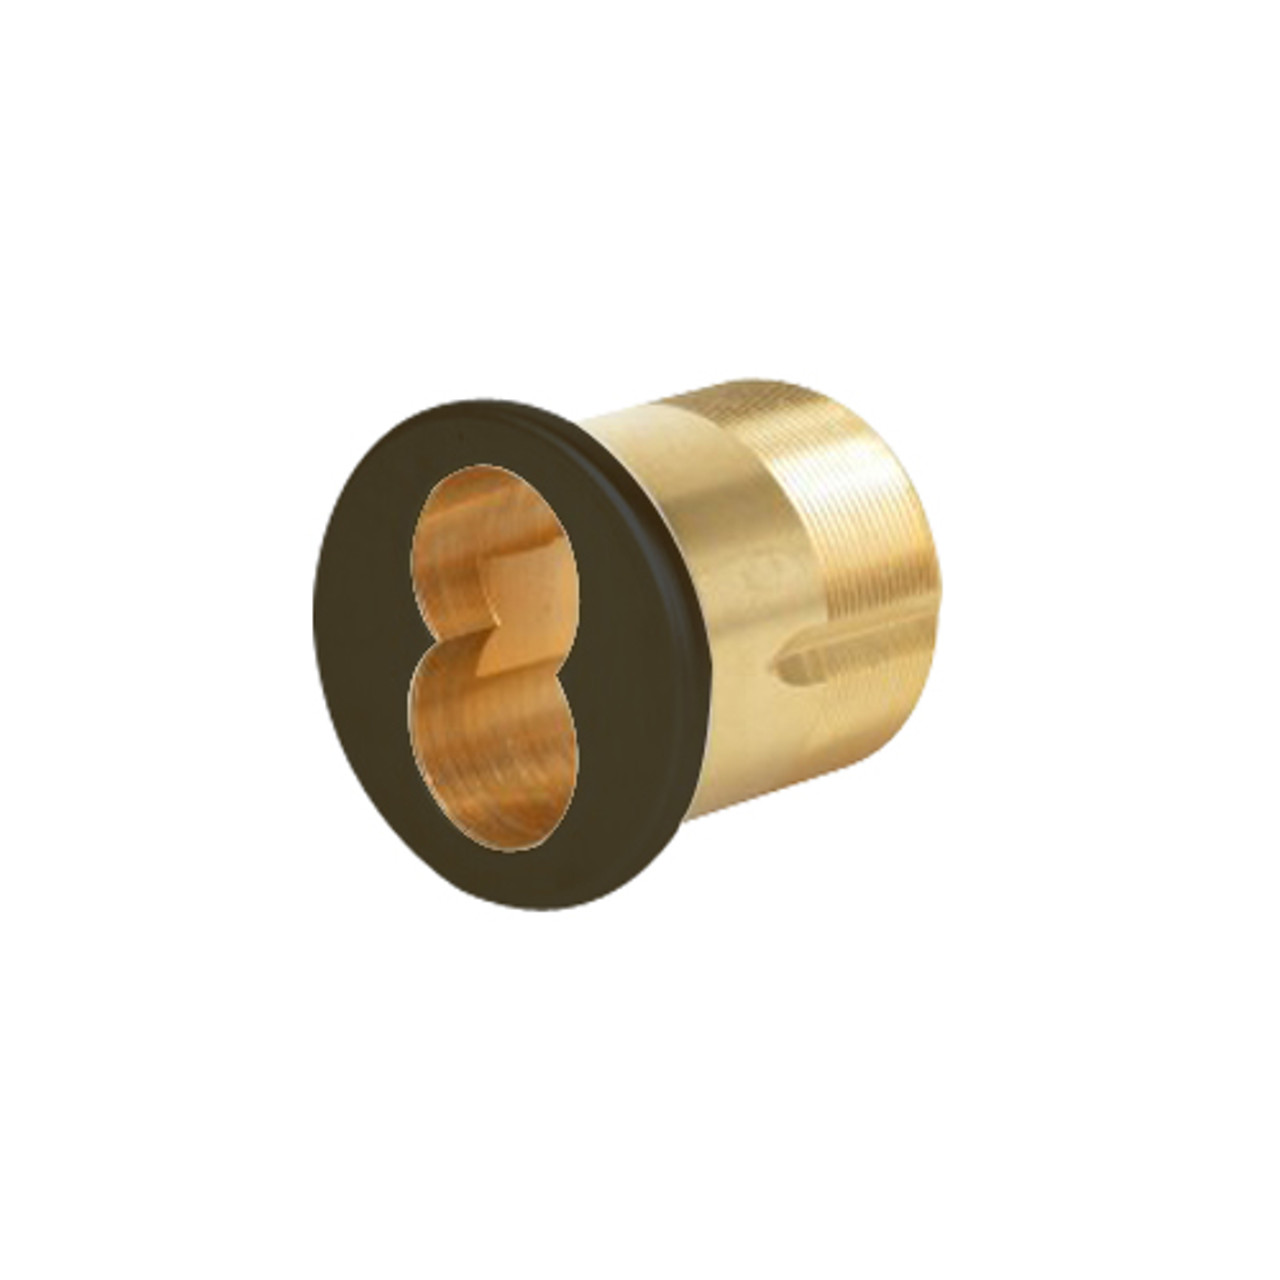 CR1070-134-A06-6-613 Corbin Mortise Interchangeable Core Housing with Schlage L9000 Cam in Oil Rubbed Bronze Finish